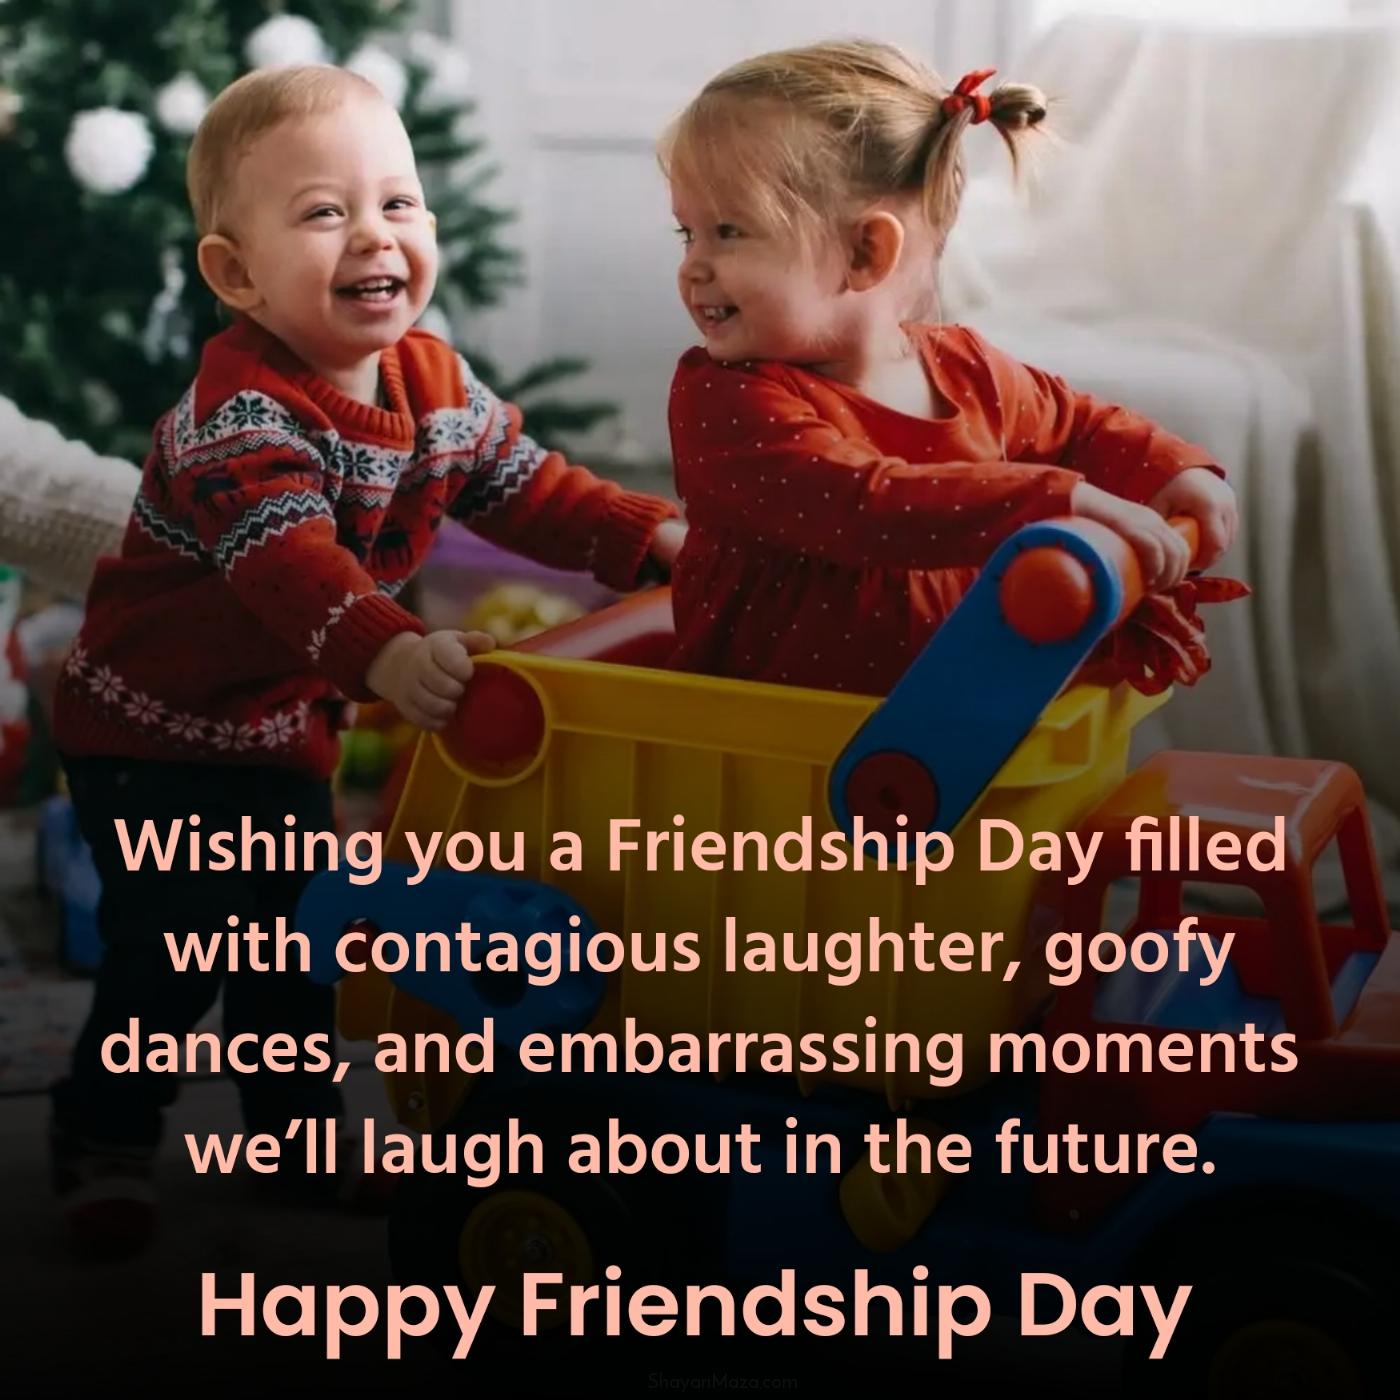 Wishing you a Friendship Day filled with contagious laughter goofy dances